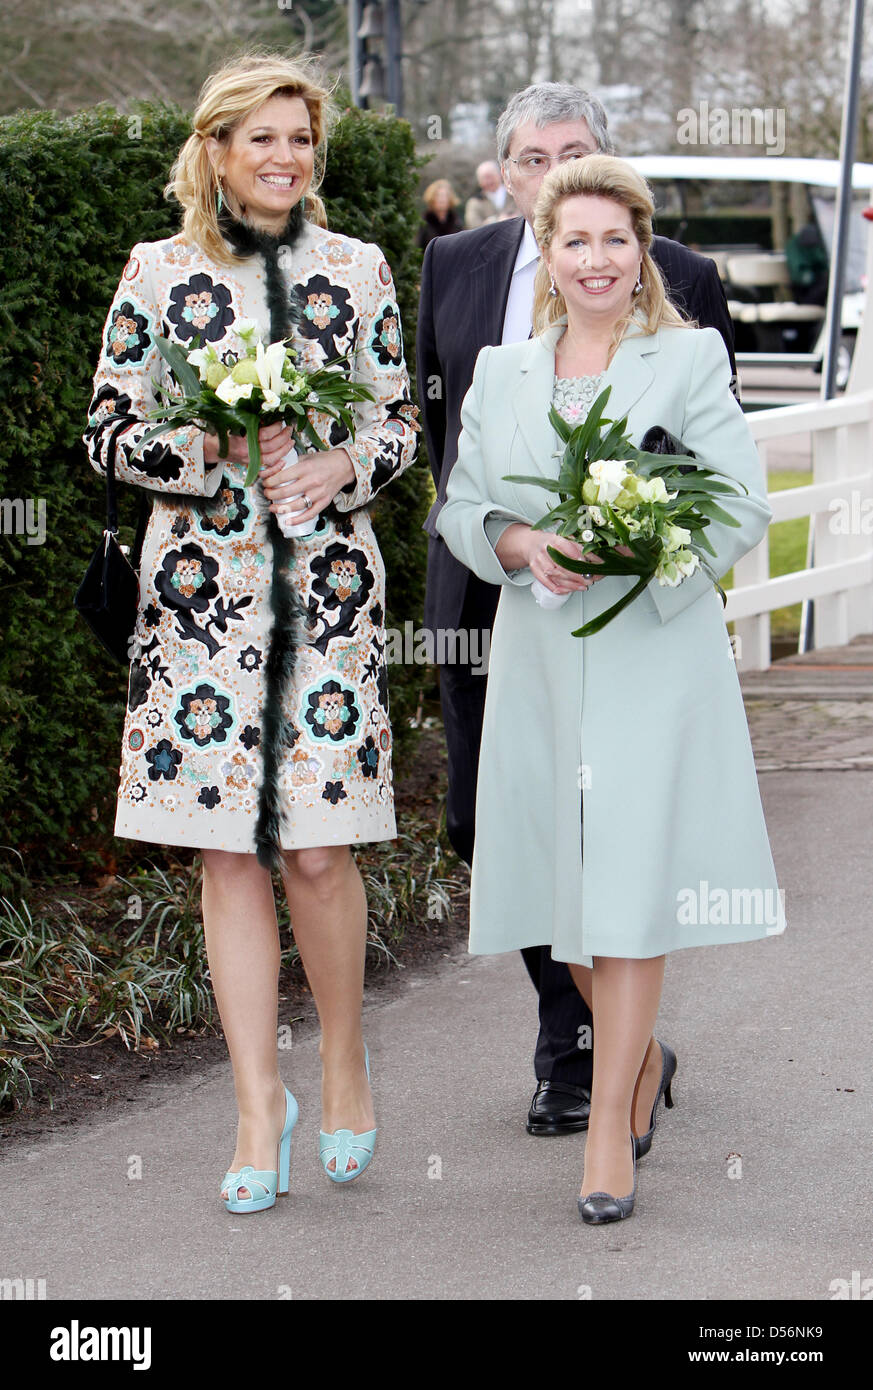 Princess Maxima of the Netherlands (L) and Russian First Lady Svetlana Medvedeva attend the season opening of the International flower exhibition 'De Keukenhof' in Lisse, Netherlands, 17 March 2010. The theme of this year's exhibition is 'From Russia with Love'. Photo: Patrick van Katwijk Stock Photo